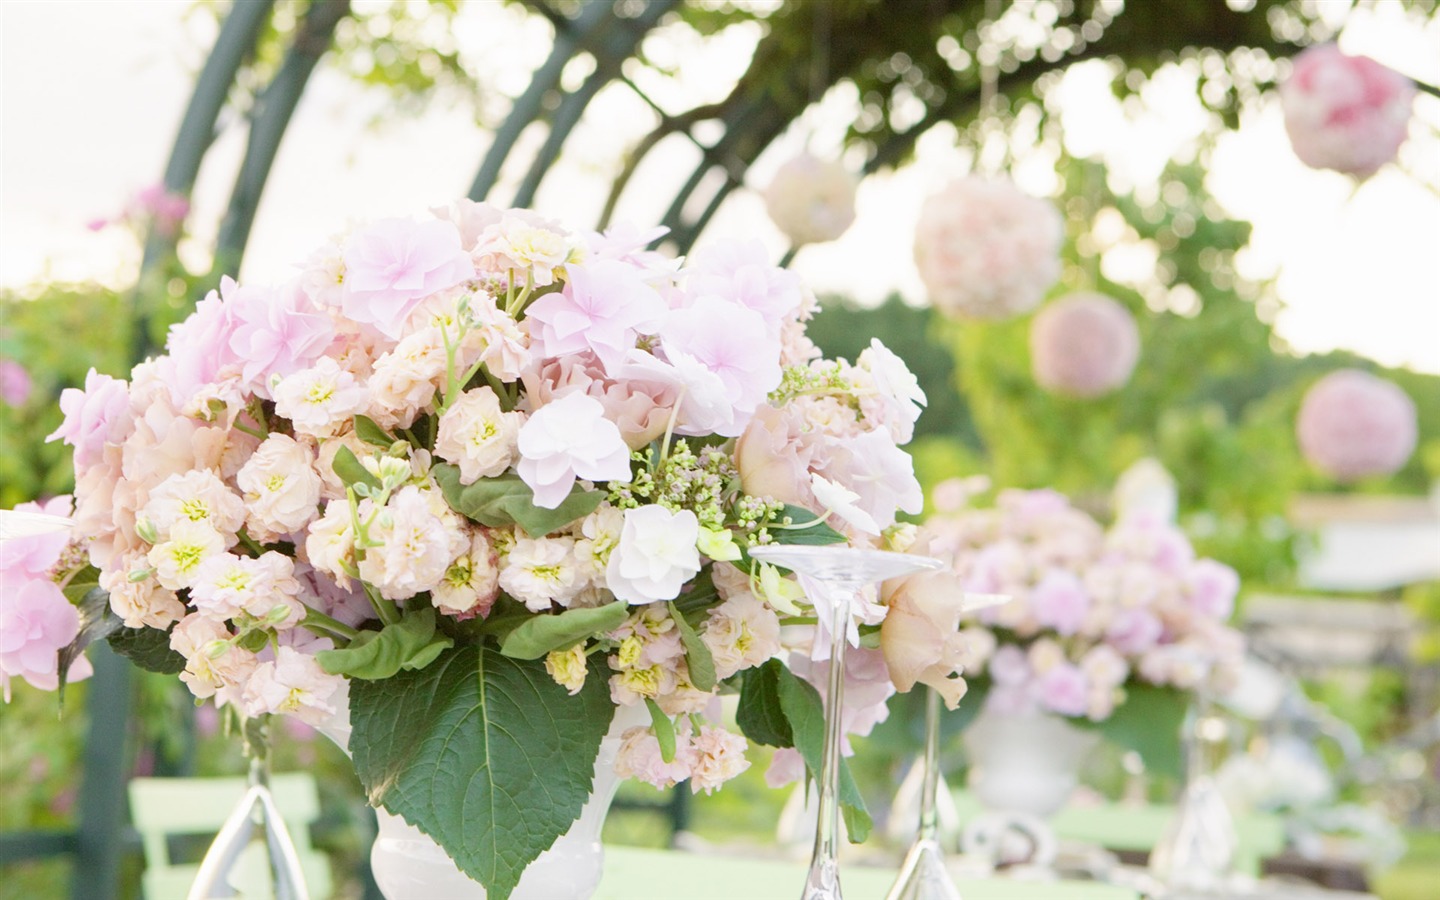 Weddings and Flowers wallpaper (1) #1 - 1440x900